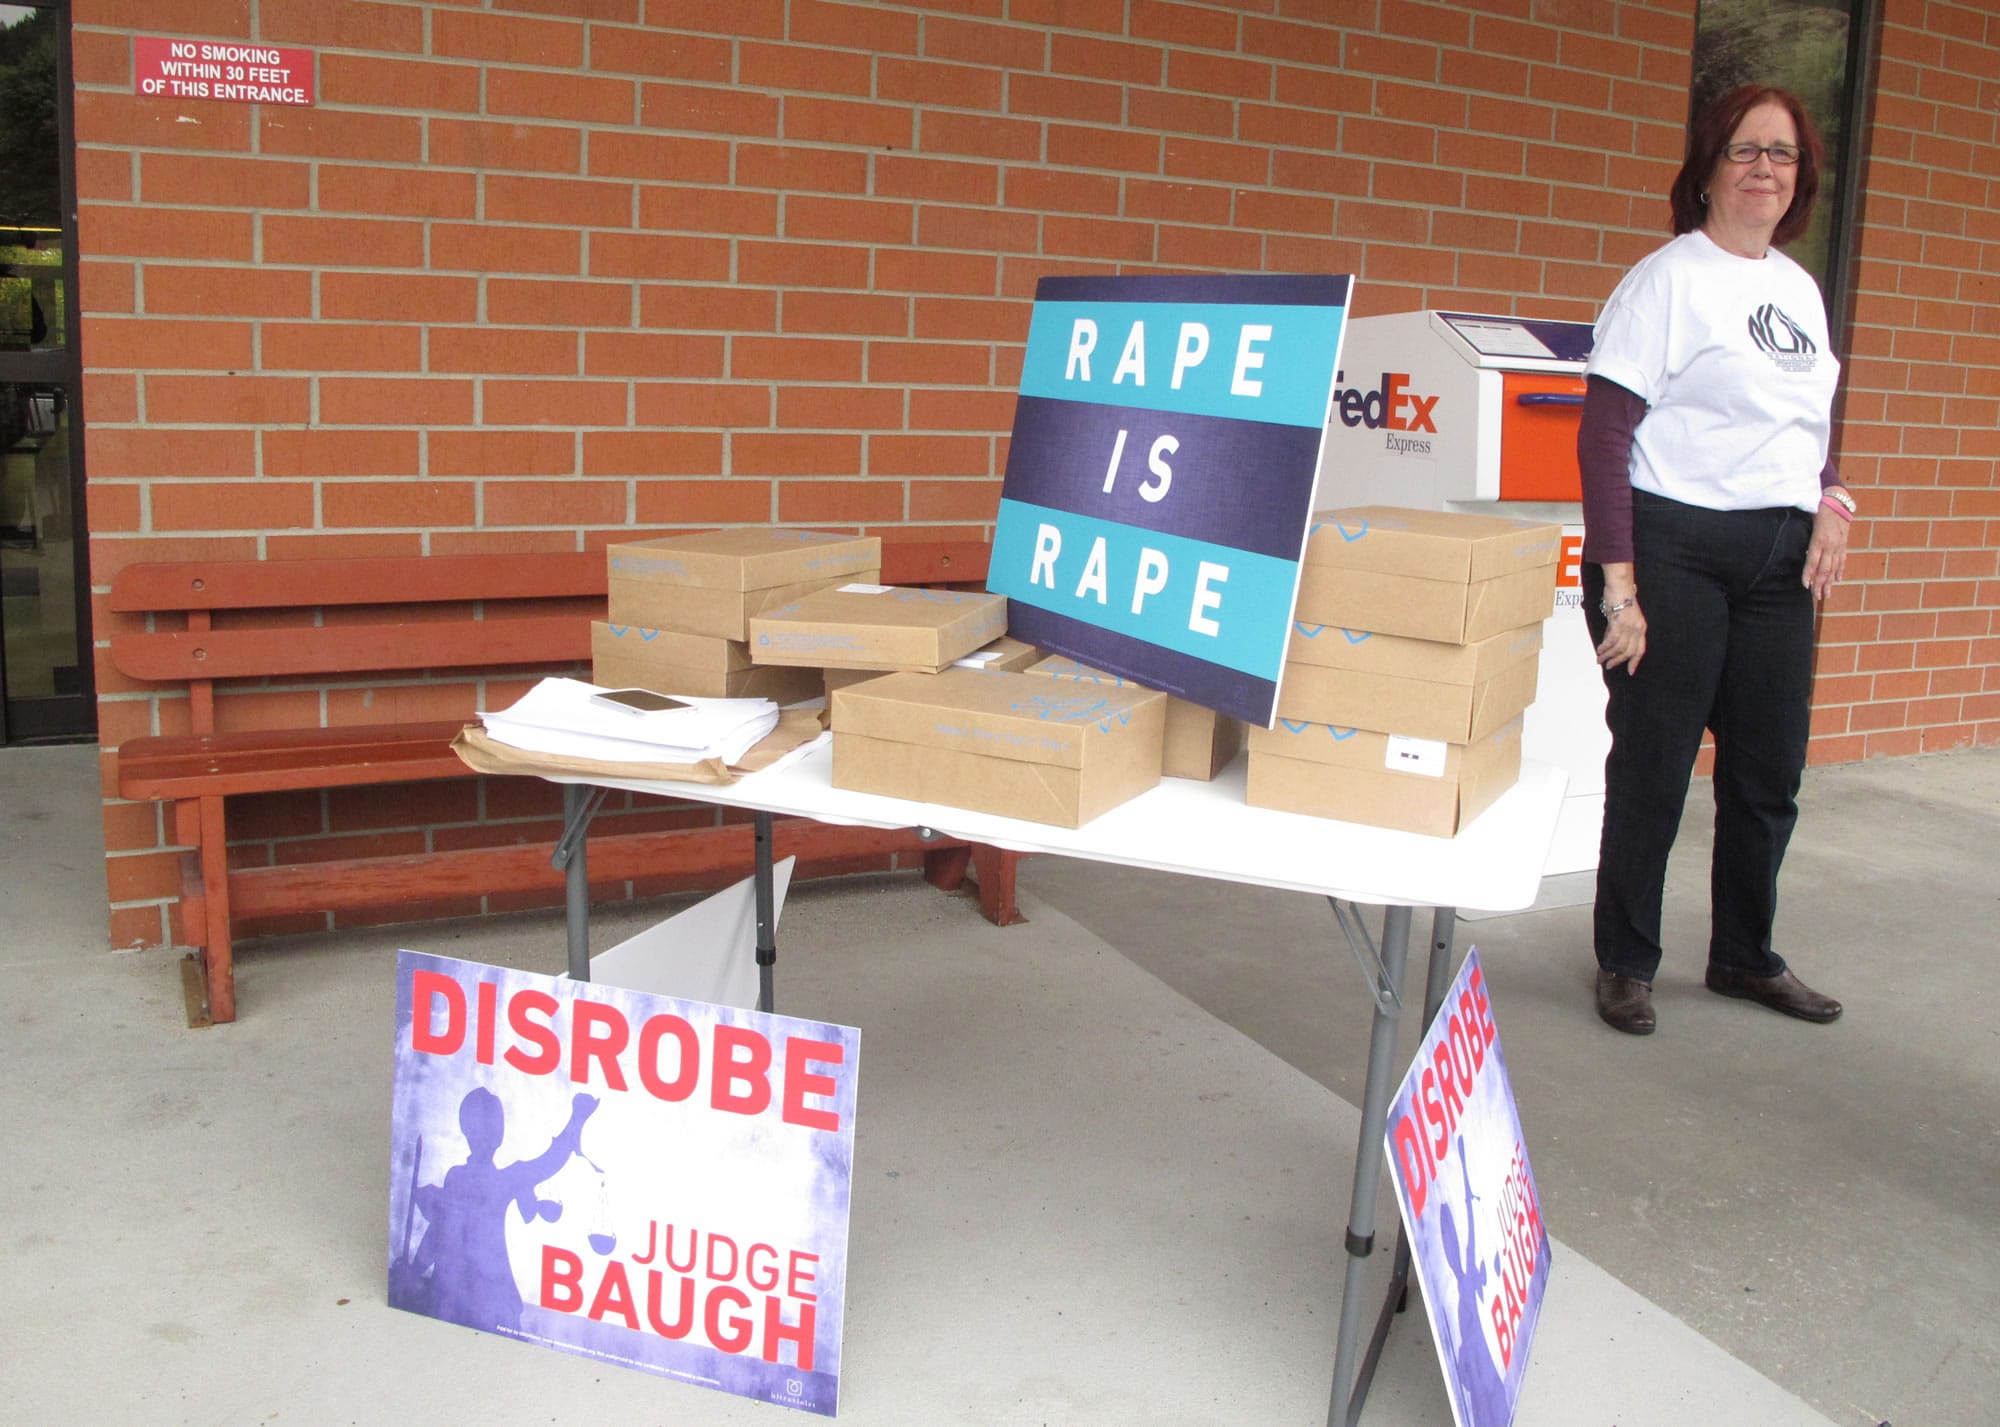 Marian Bradley with the National Organization for Women stands behind boxes containing 140,000 names and addresses of citizens who signed online petitions calling for the removal of Montana District Judge G. Todd Baugh on Tuesday in Helena, Mont.